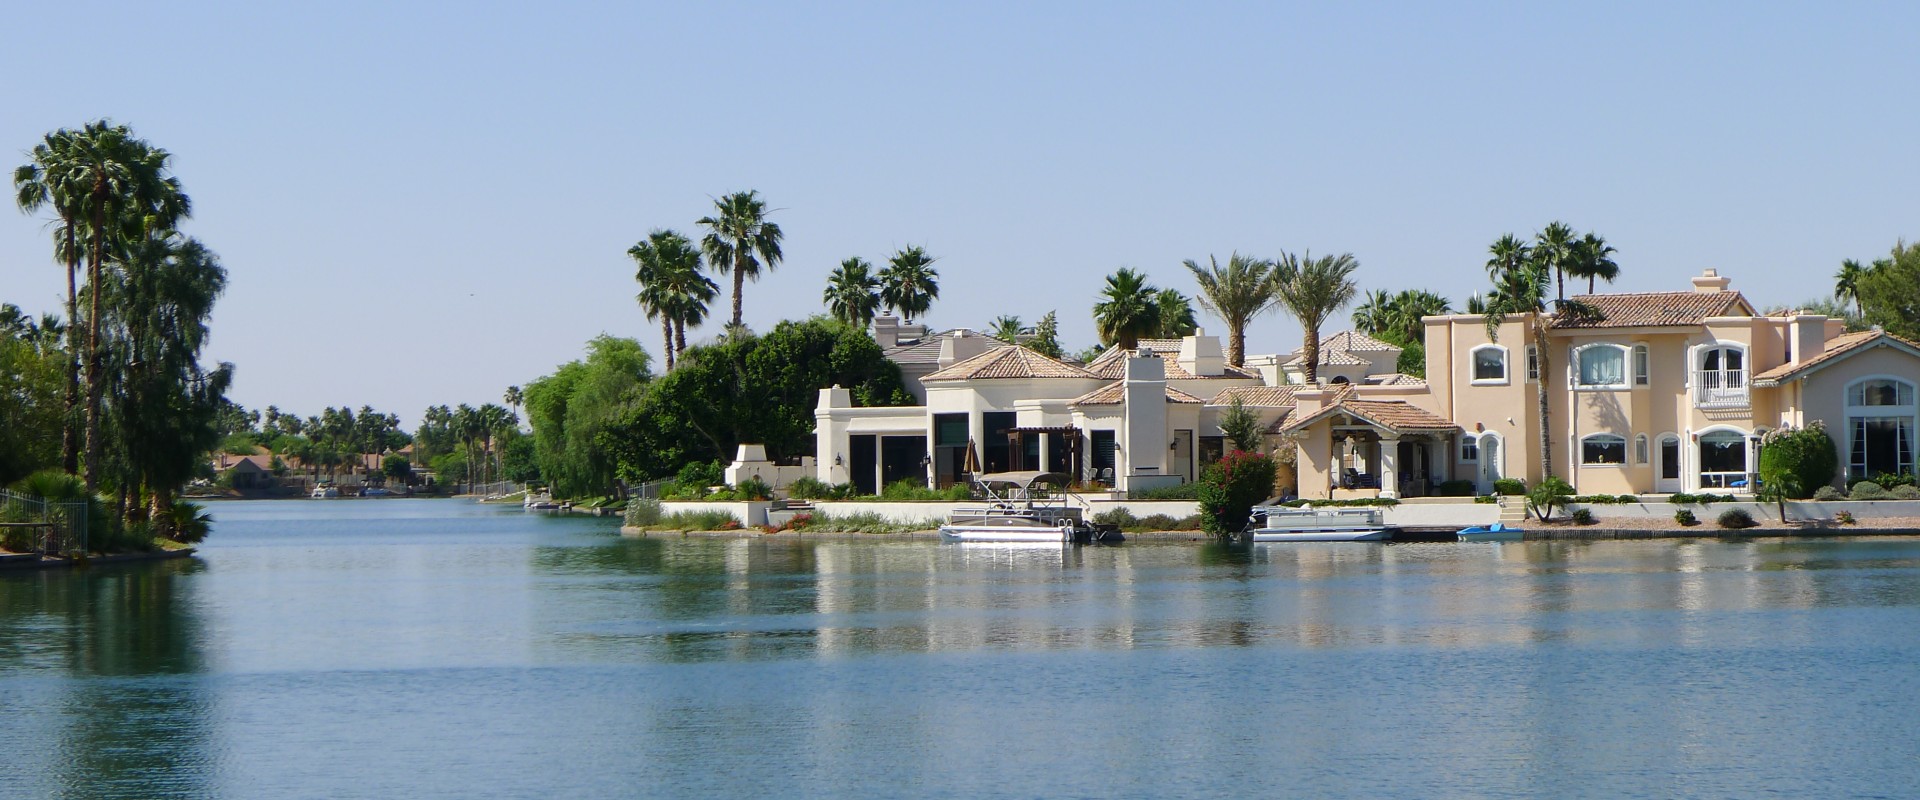 Waterfront Homes for Sale in Arizona